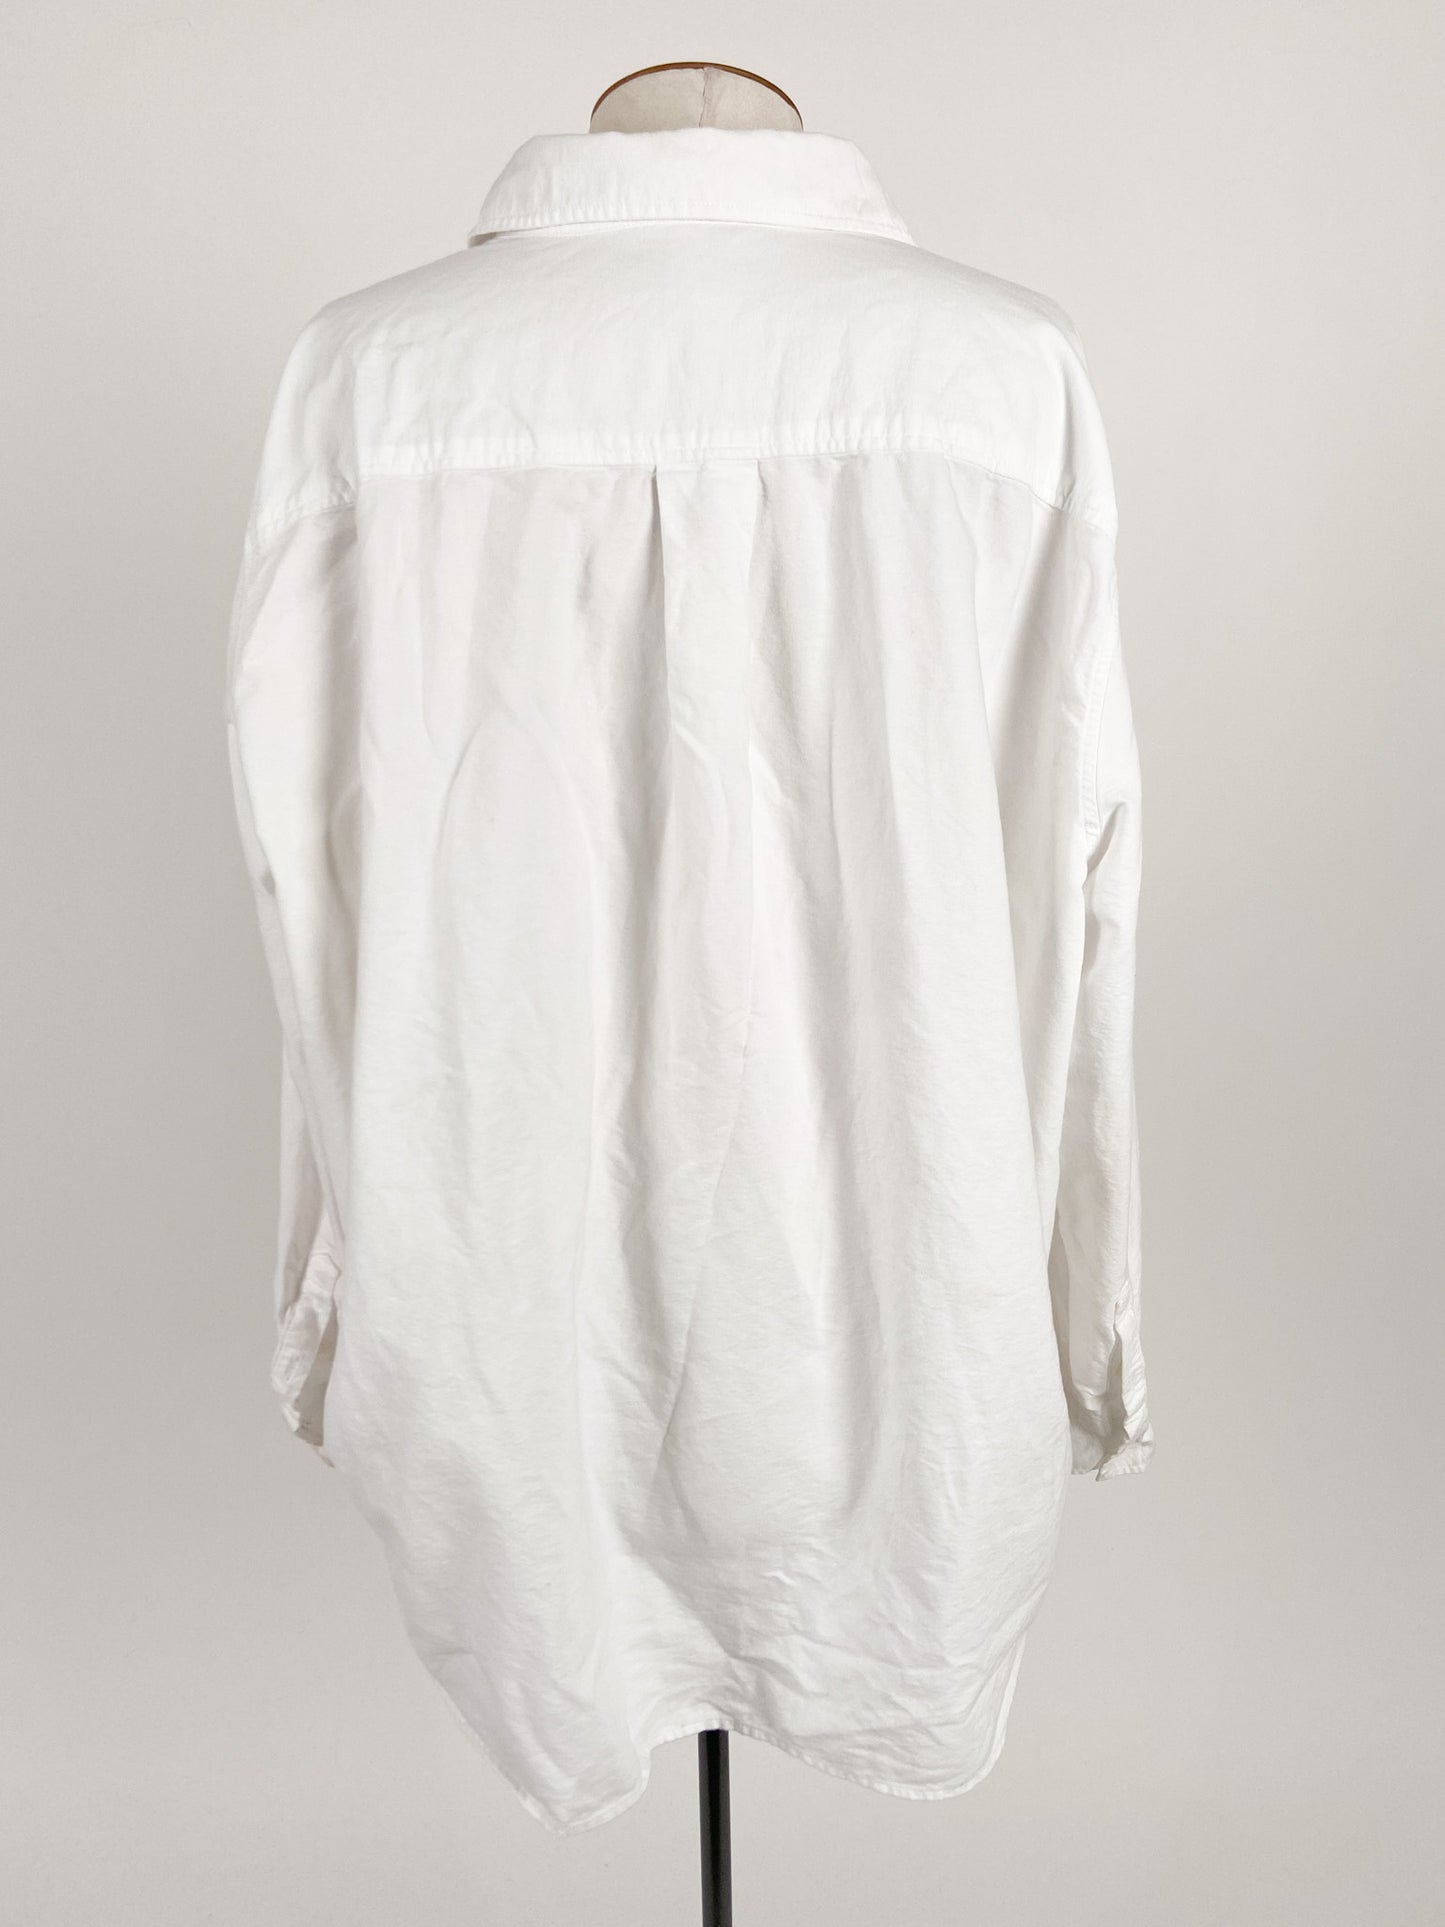 H&M | White Casual/Workwear Top | Size L